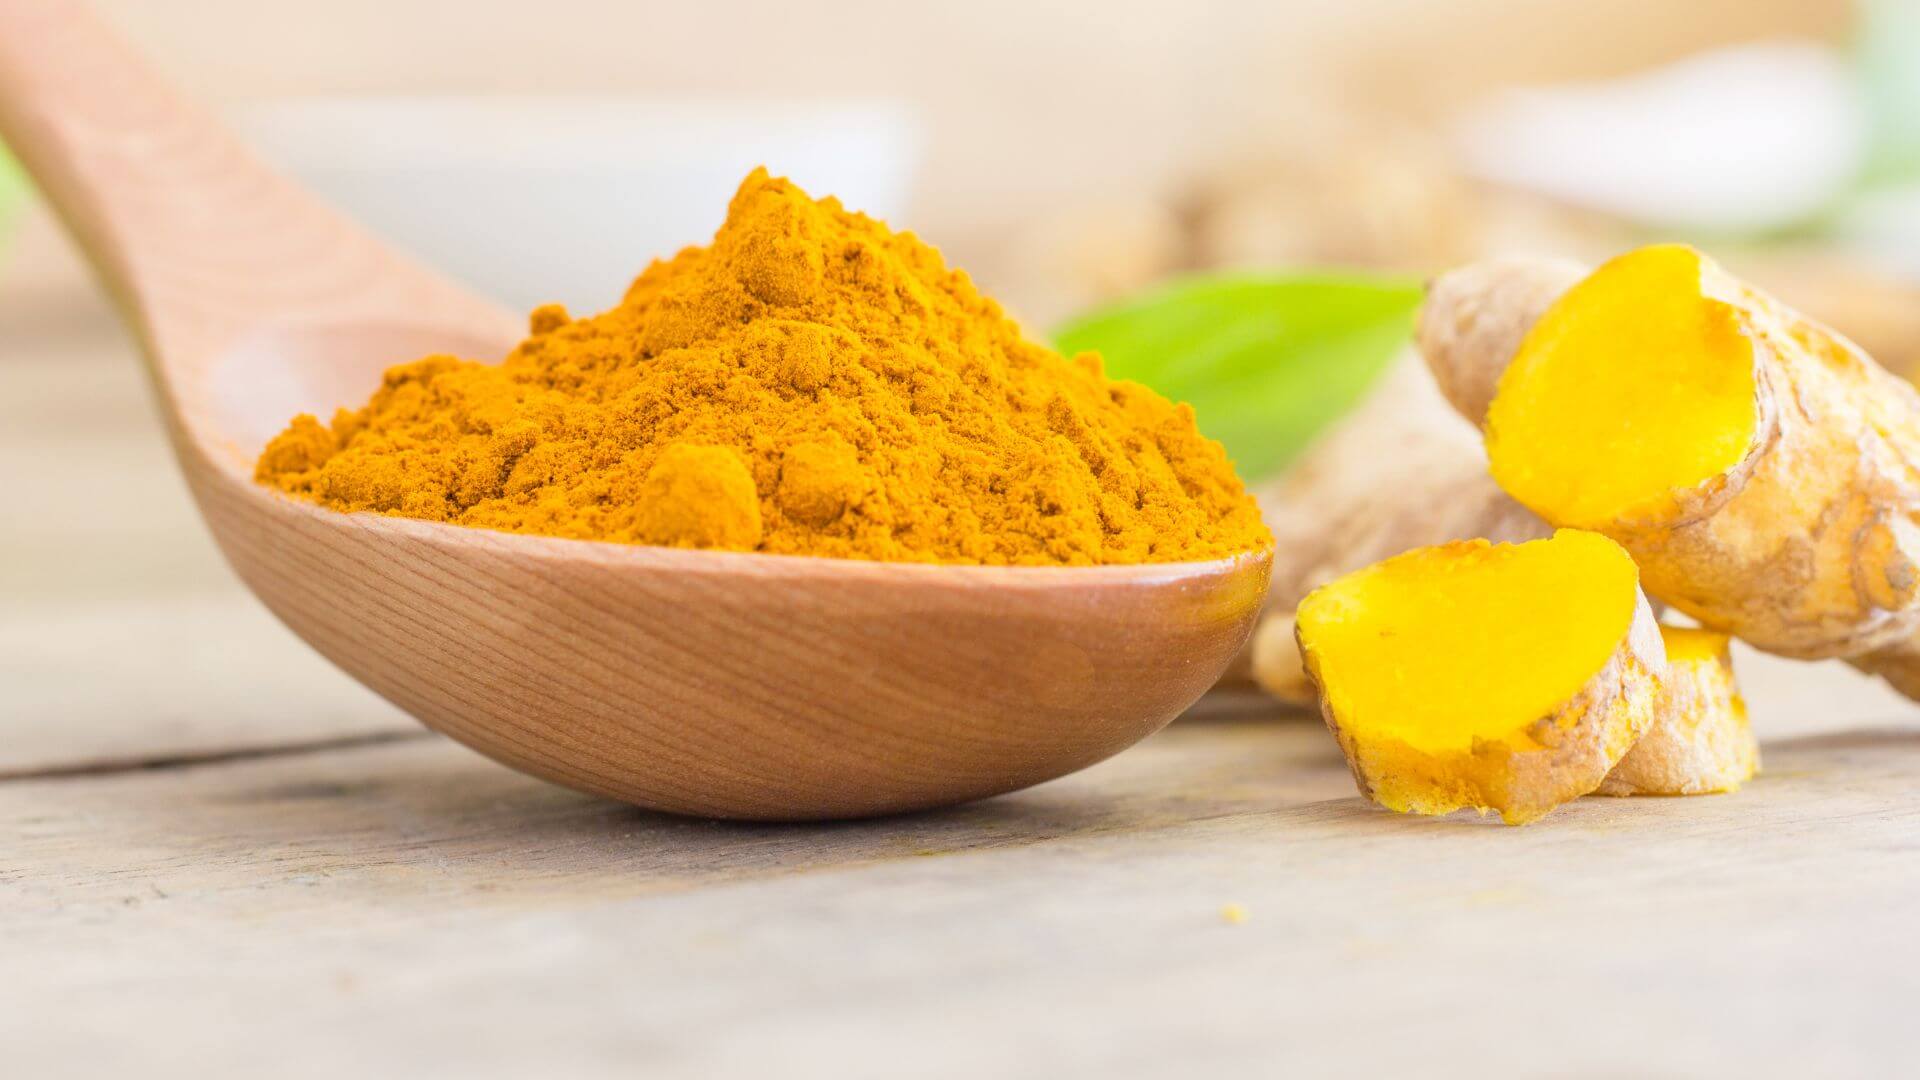 Collombatti Naturals the power of turmeric picture of a spoonful of turmeric powder